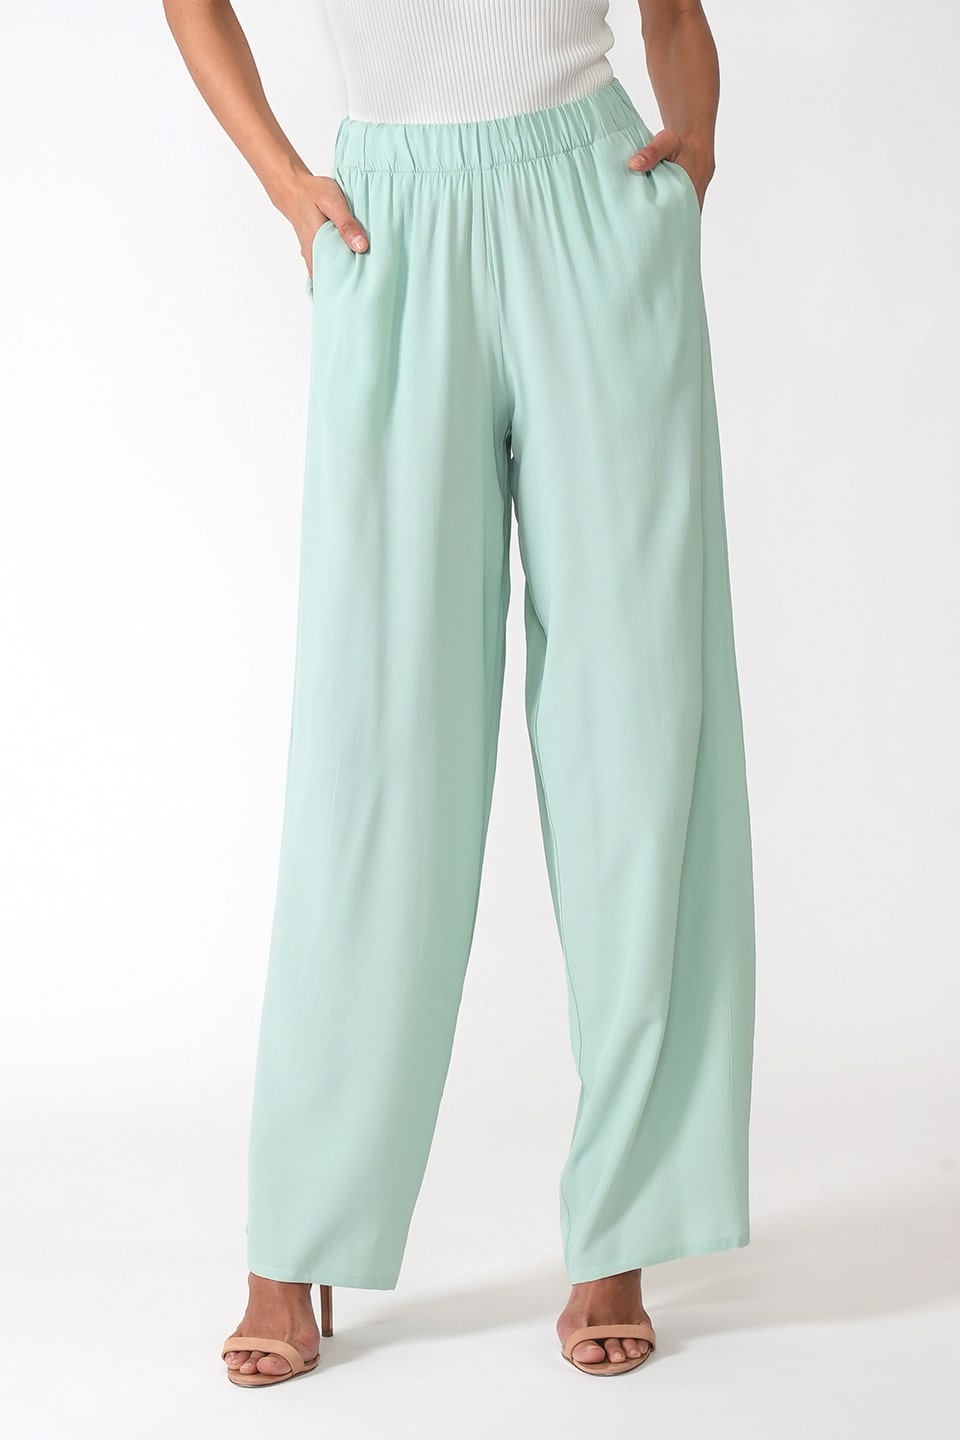 Shop online trendy Green Women pants from Federica Tosi Fashion designer. Product gallery 1